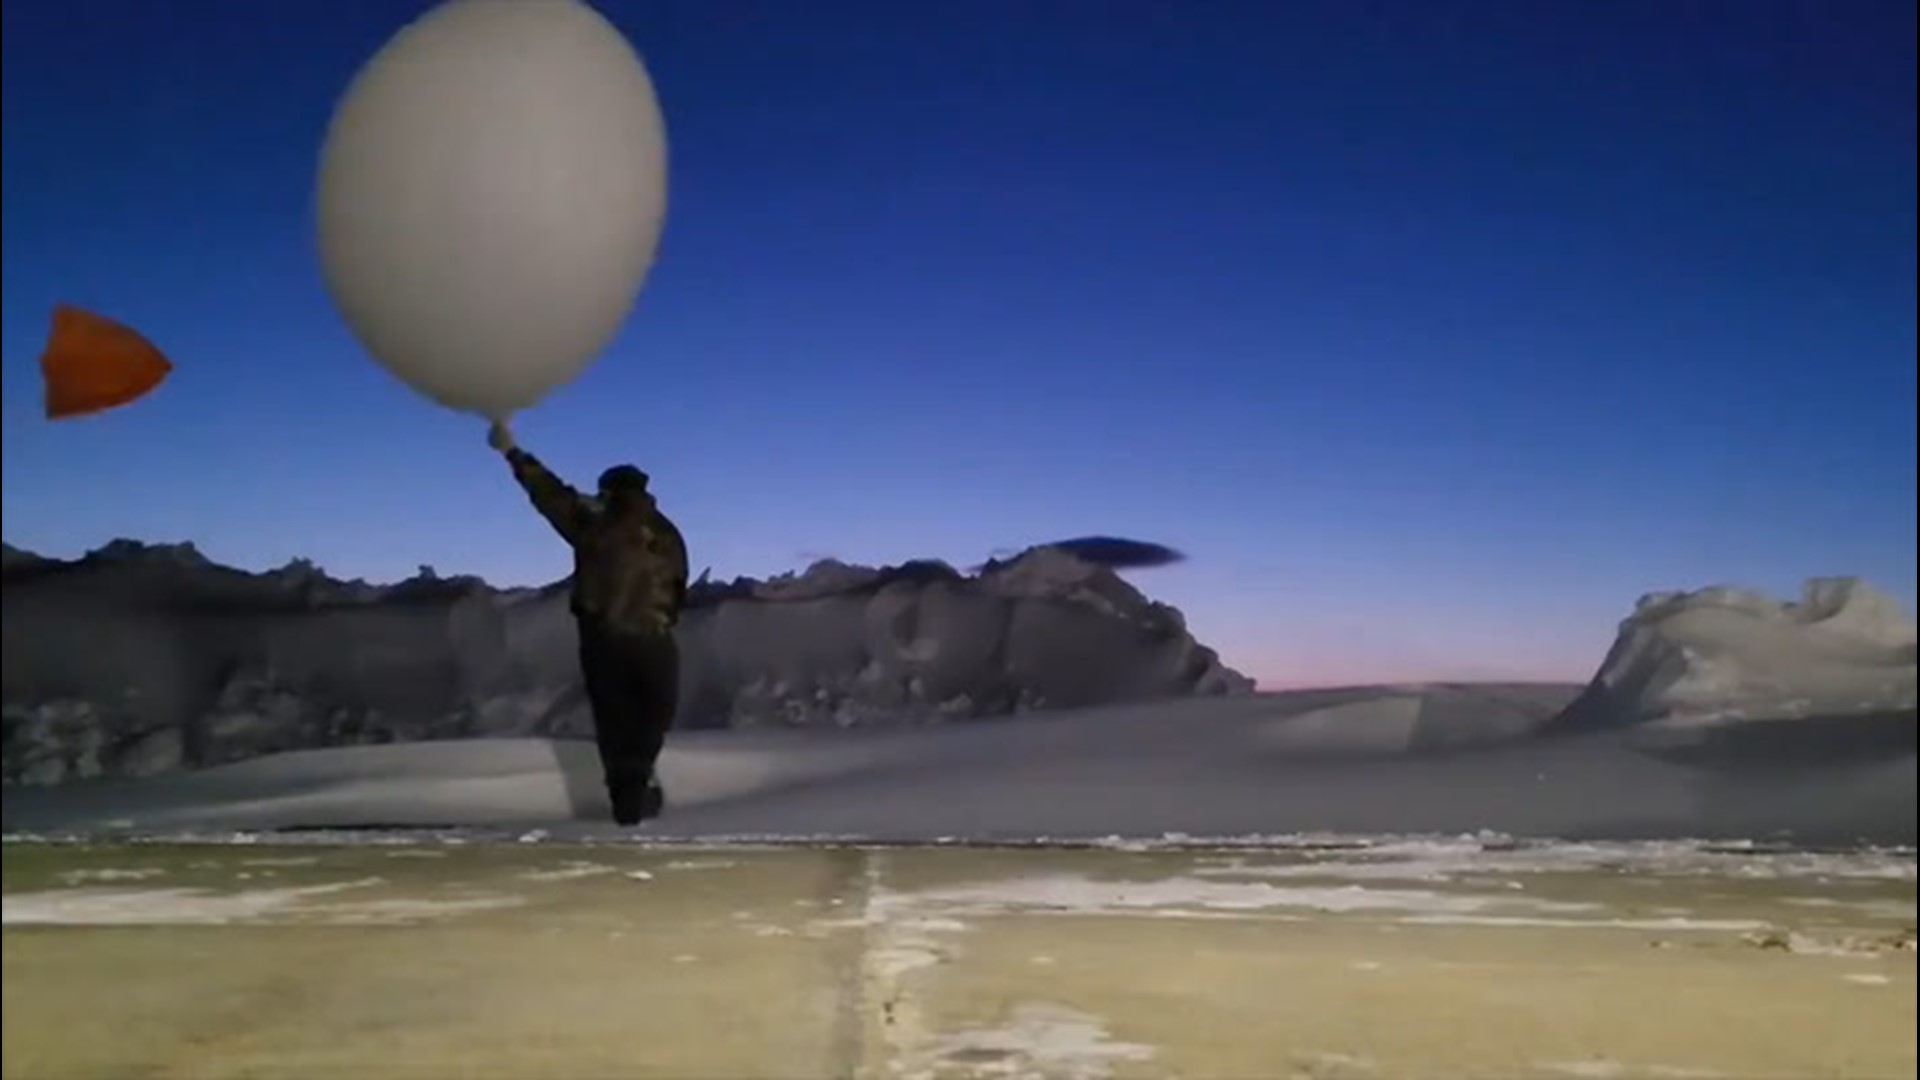 A meteorologist with the National Weather Service at the office in Caribou, Maine, lost control of a weather balloon as strong, gusty winds swept through the area.